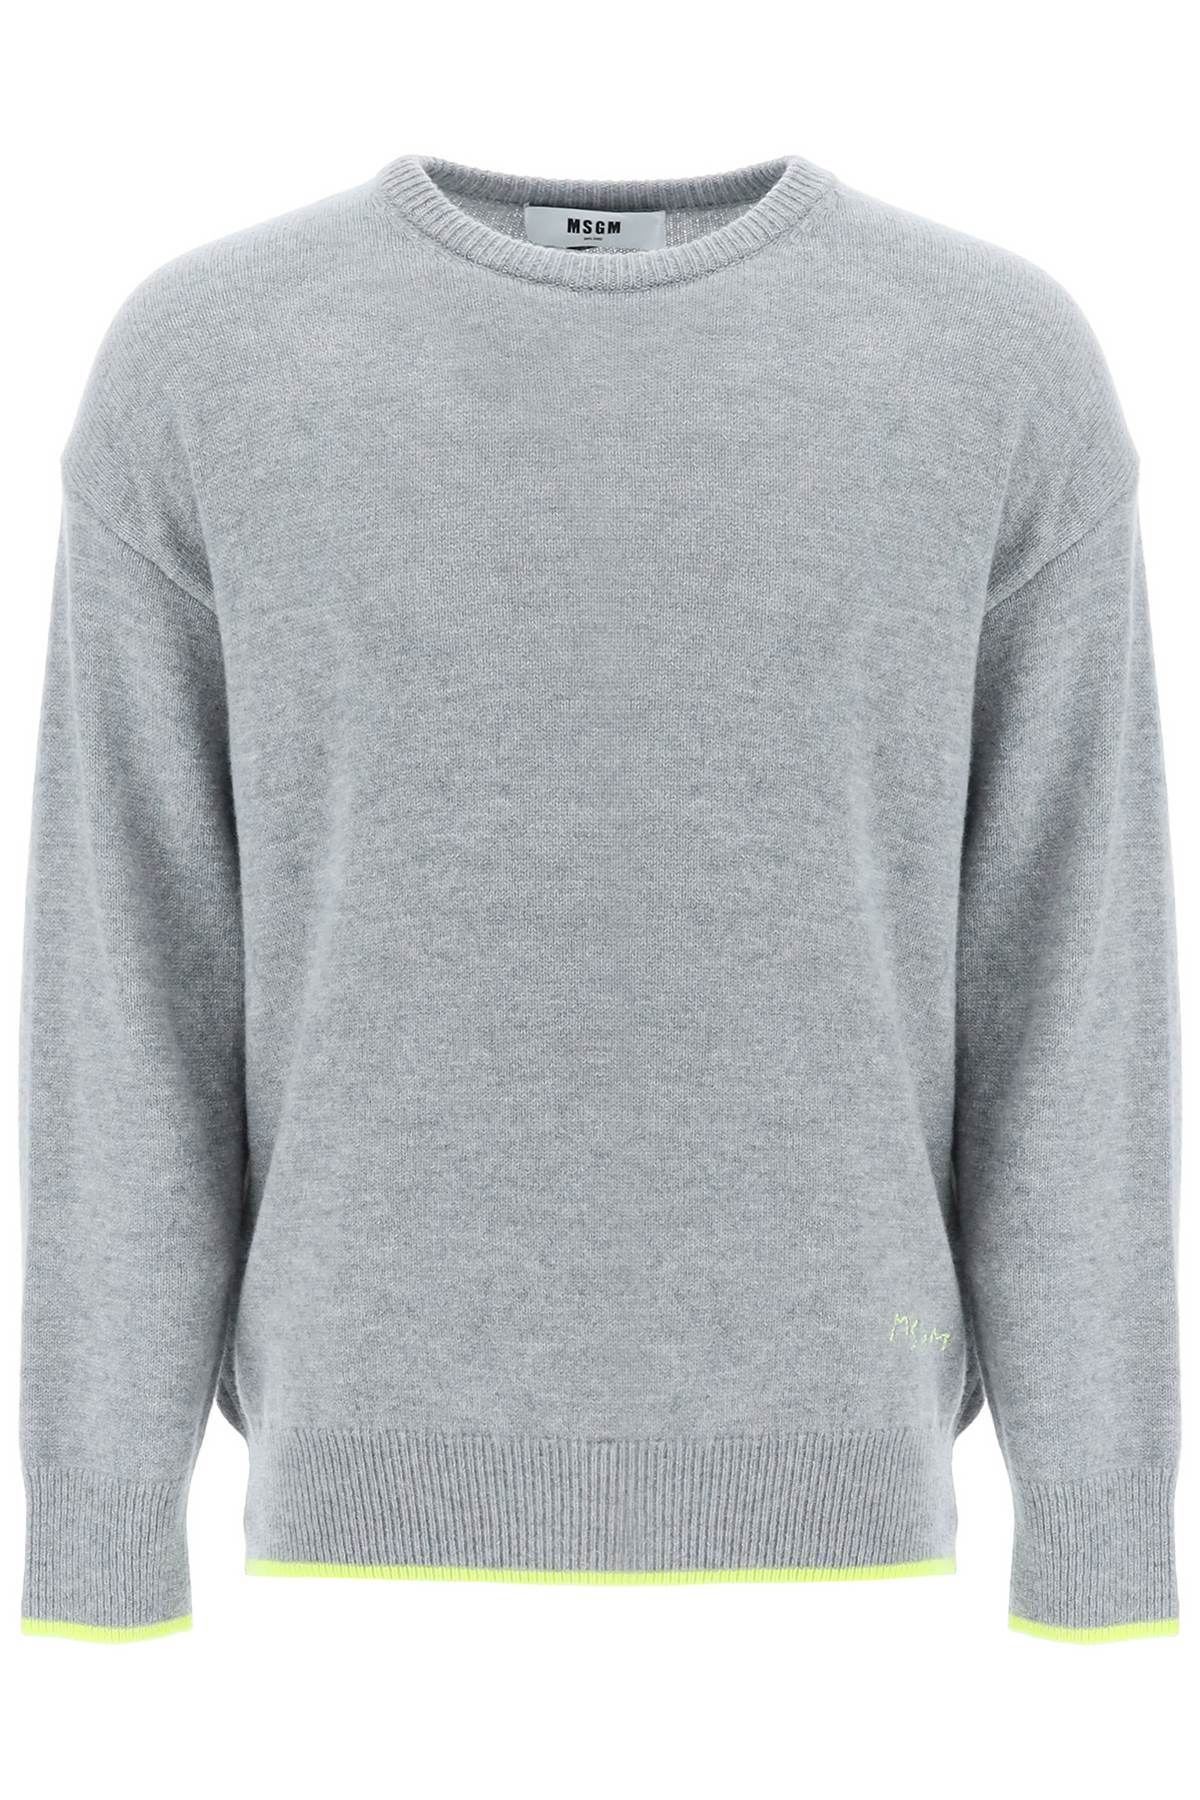 MSGM Wool And Cashmere Sweater